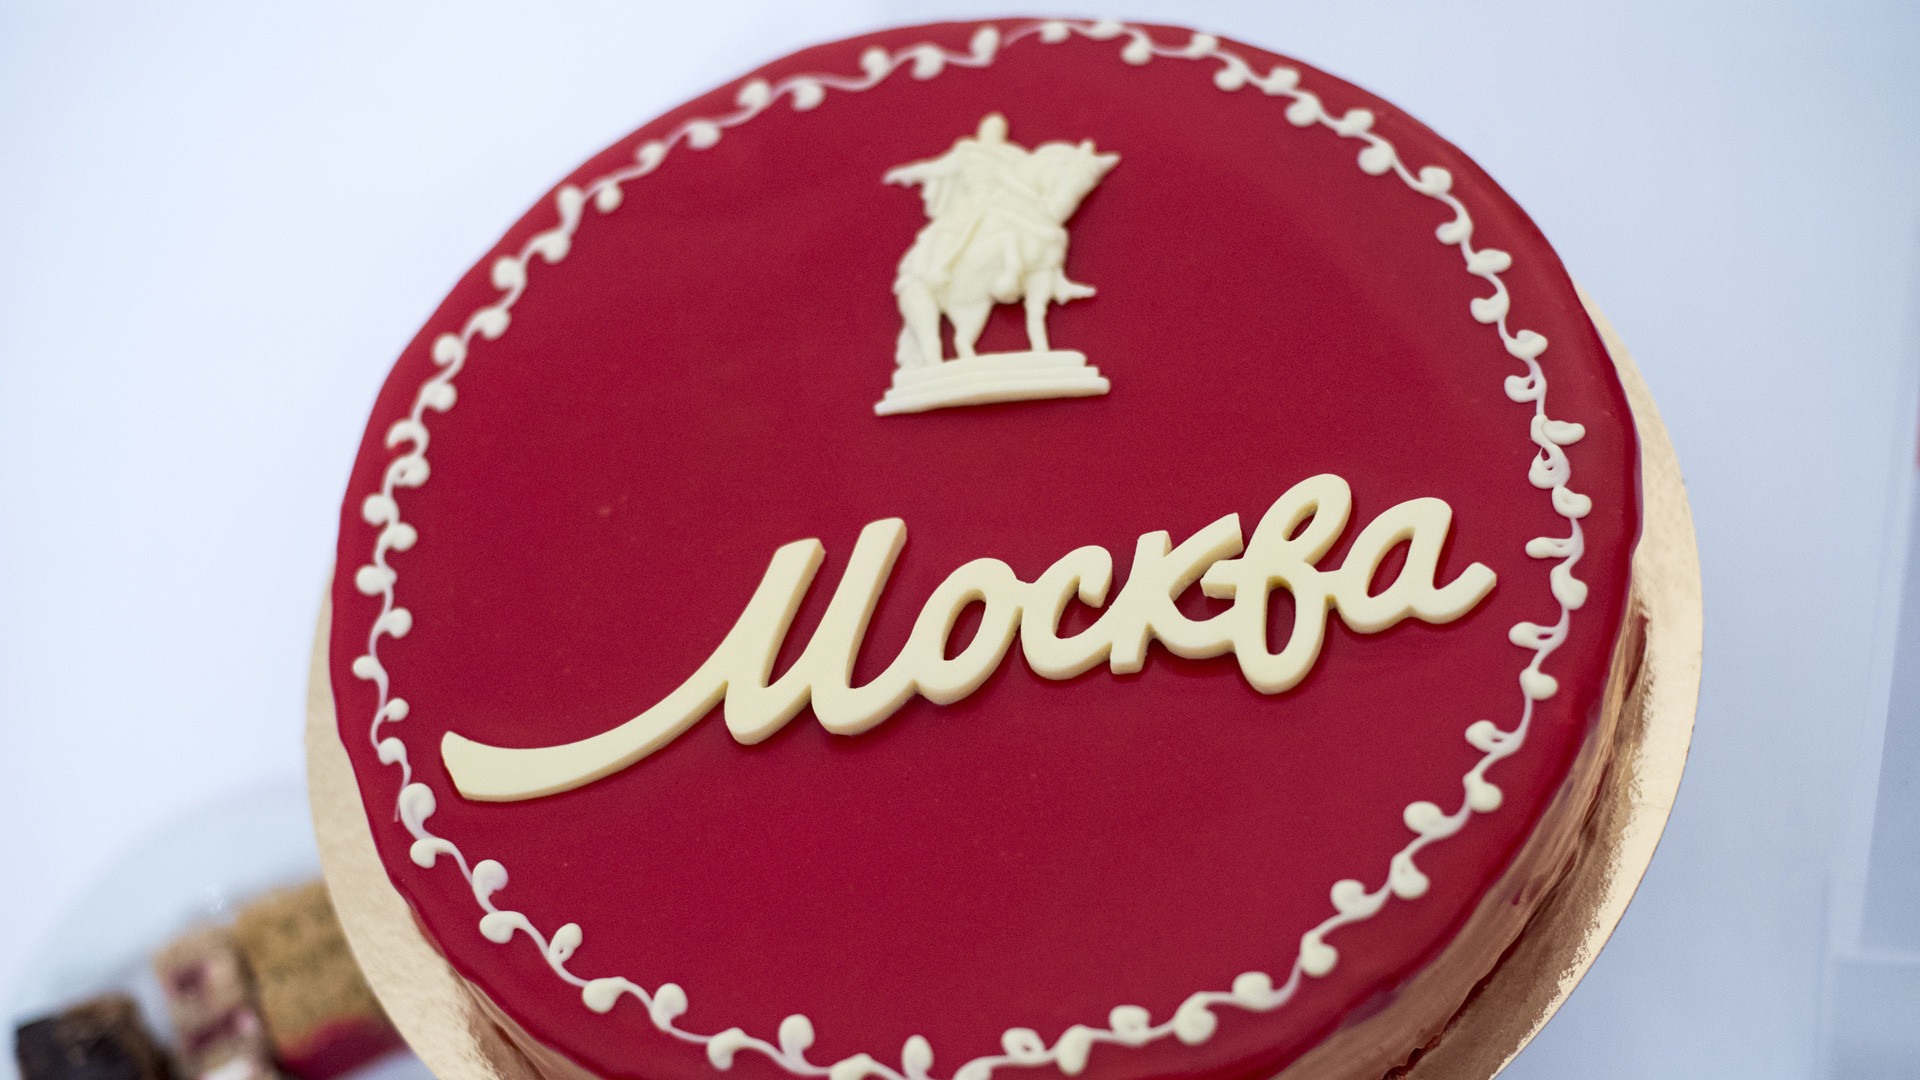 Moscow Cake